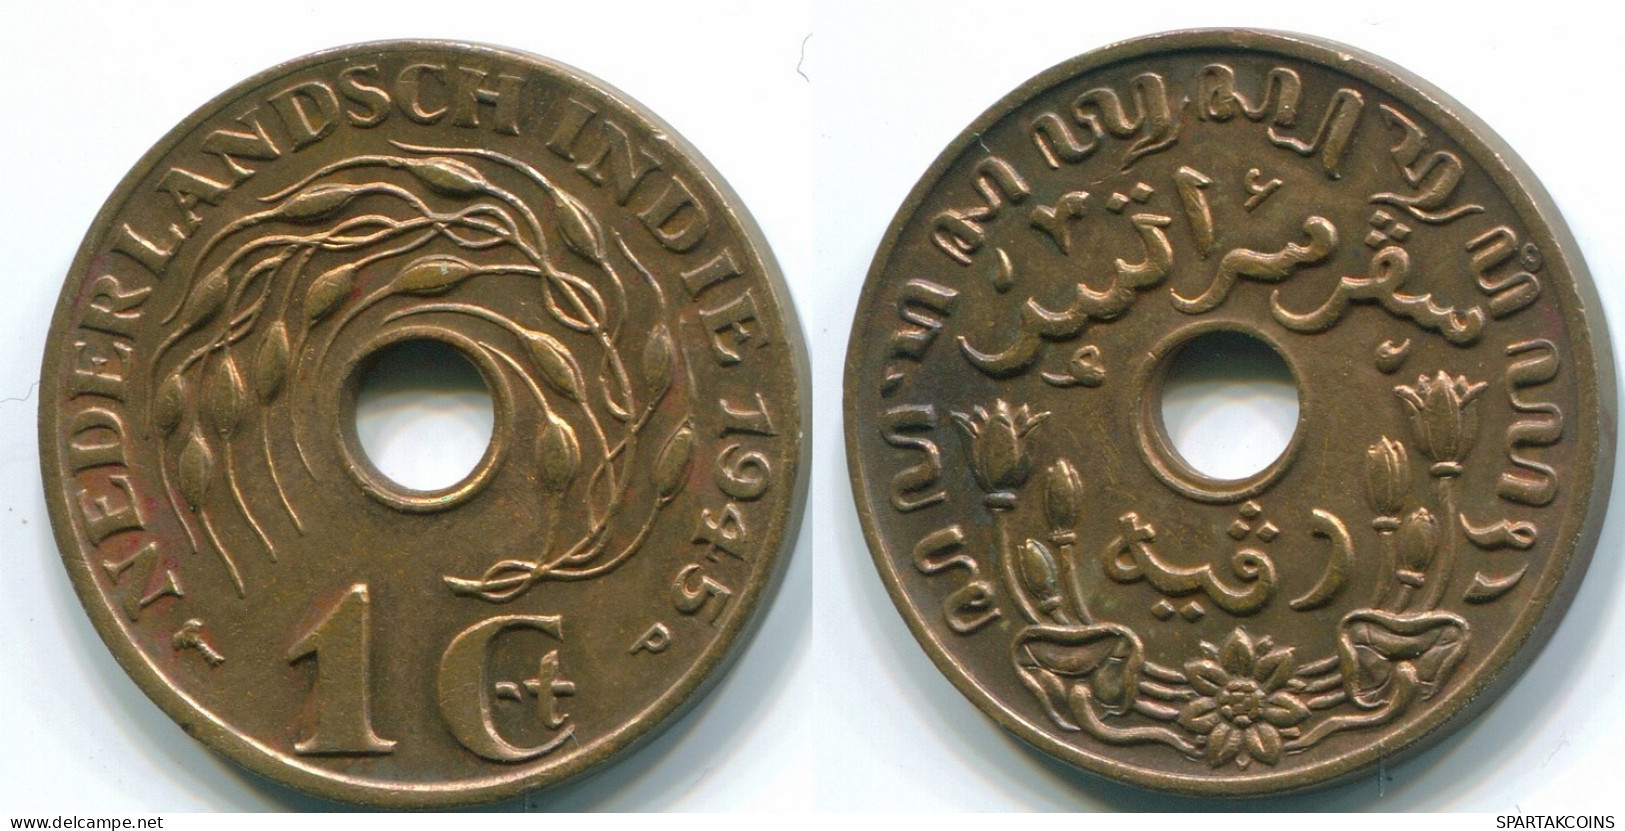 1 CENT 1945 P NETHERLANDS EAST INDIES INDONESIA Bronze Colonial Coin #S10426.U.A - Indes Neerlandesas